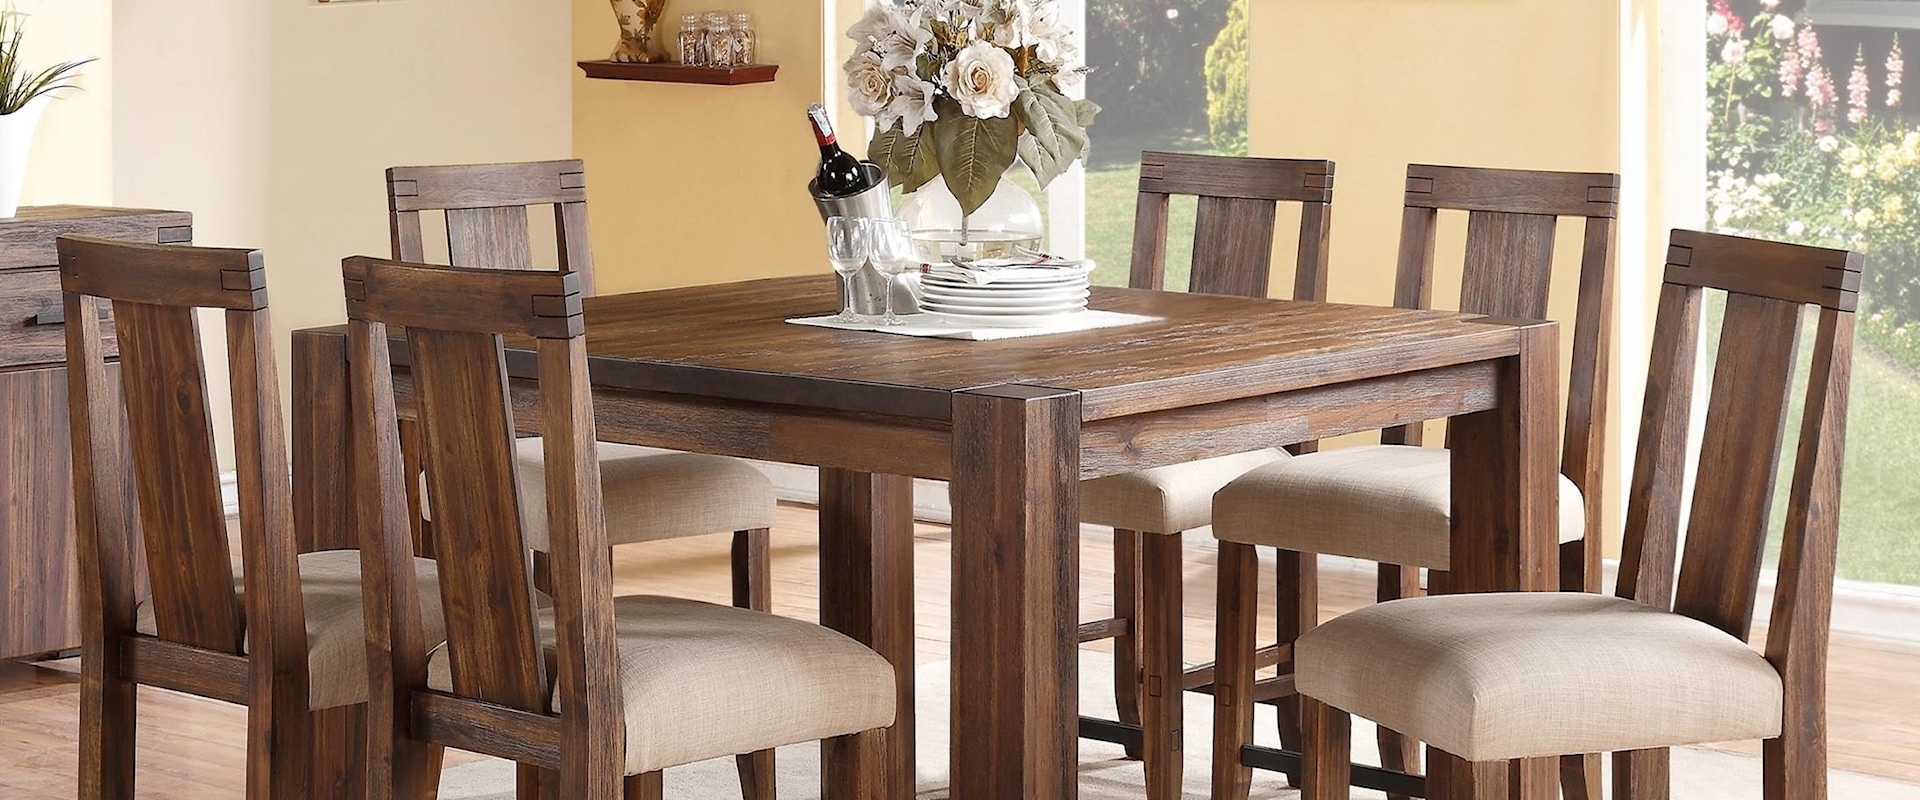 7-Piece Square Counter Table Set